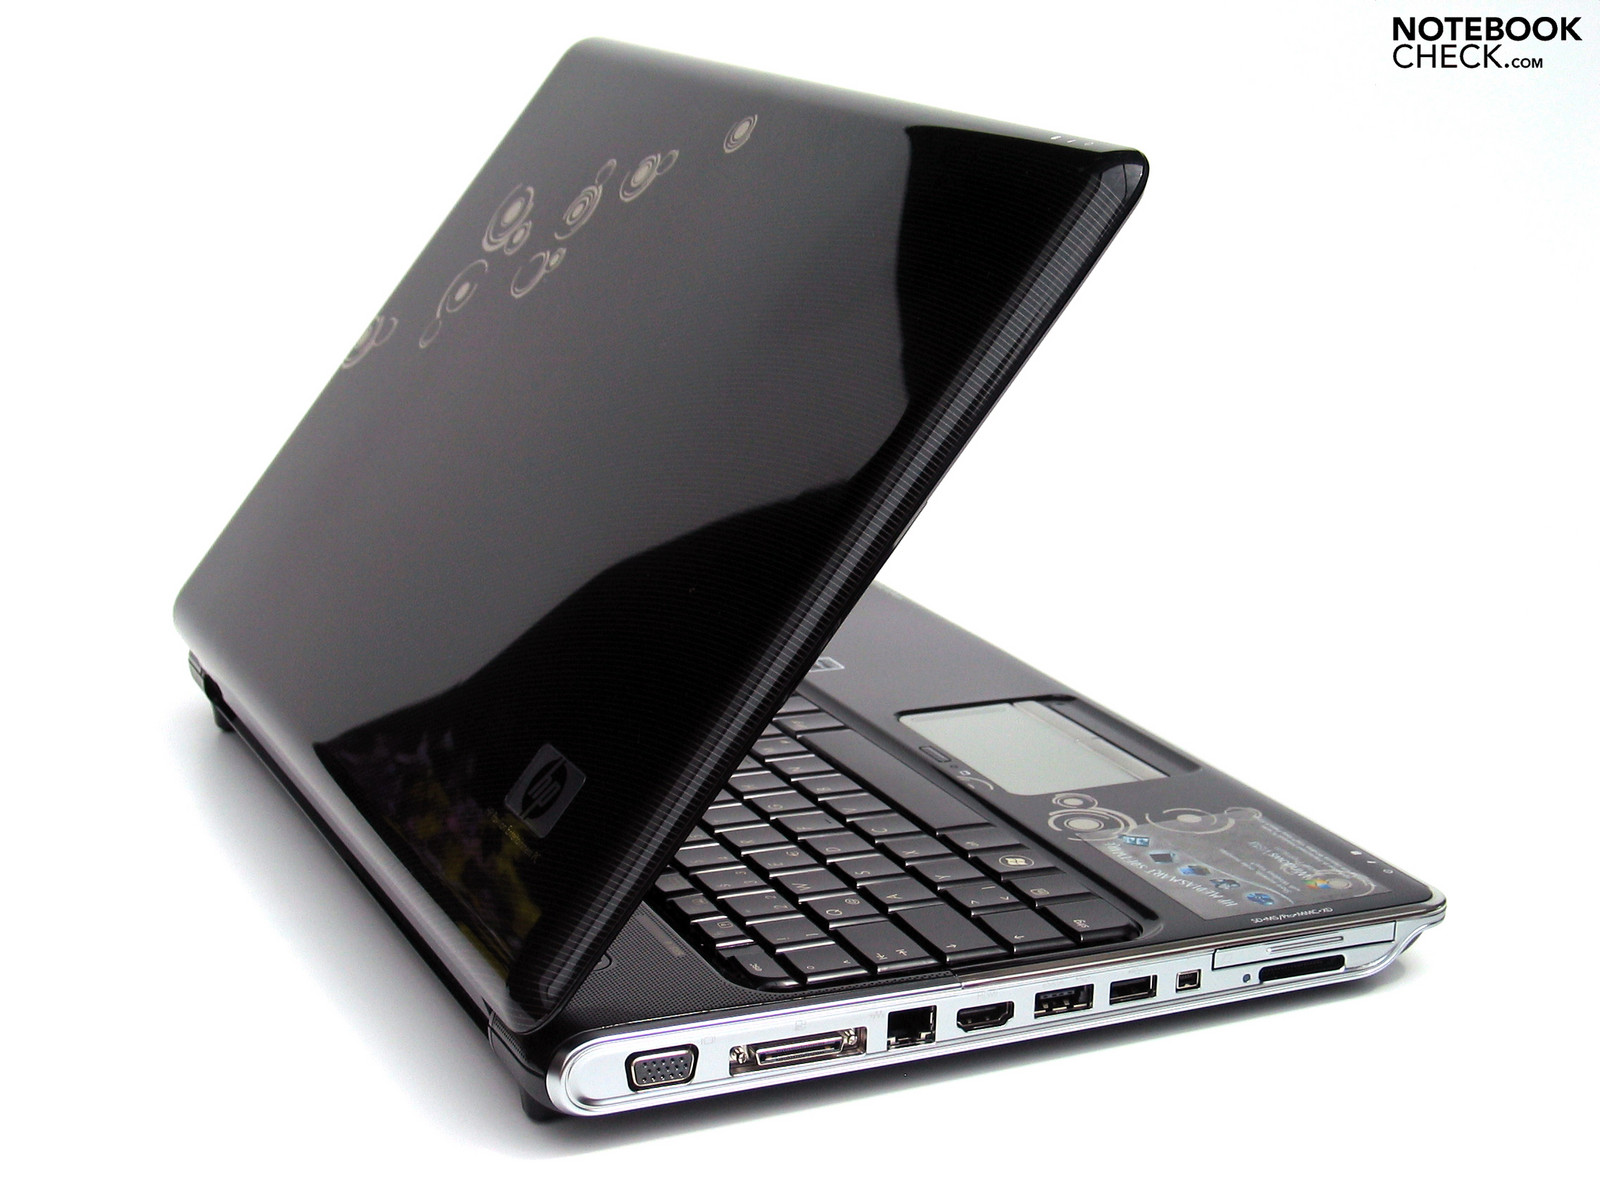 ENVY dv6-7200 Select Edition Notebook PC series